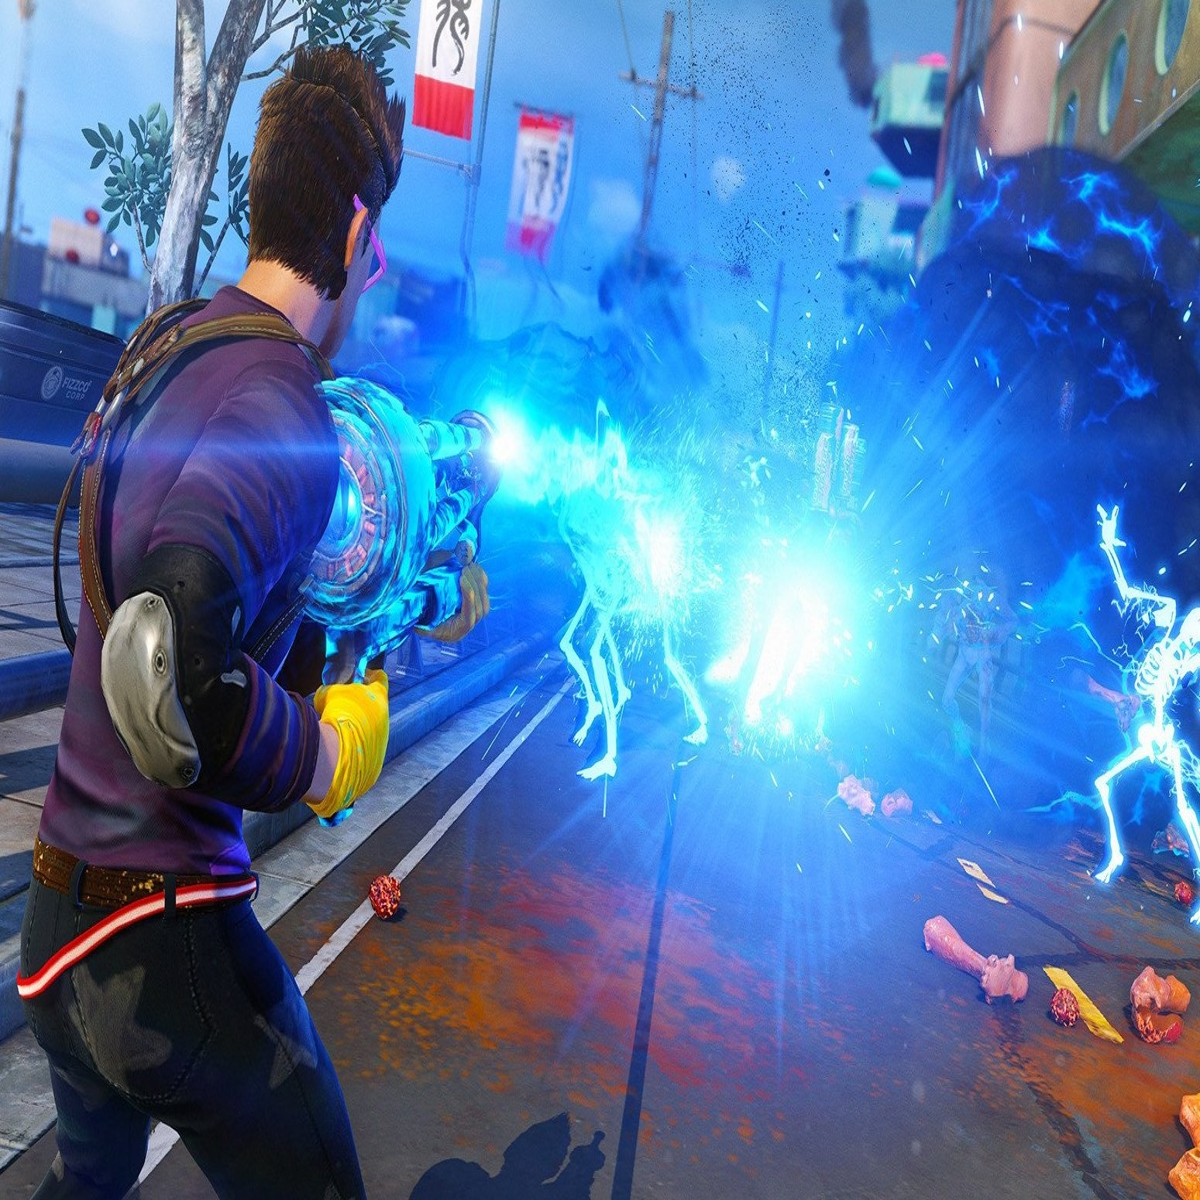 Not Only Are We Streaming Sunset Overdrive's DLC, But Lee's in a Dress Too